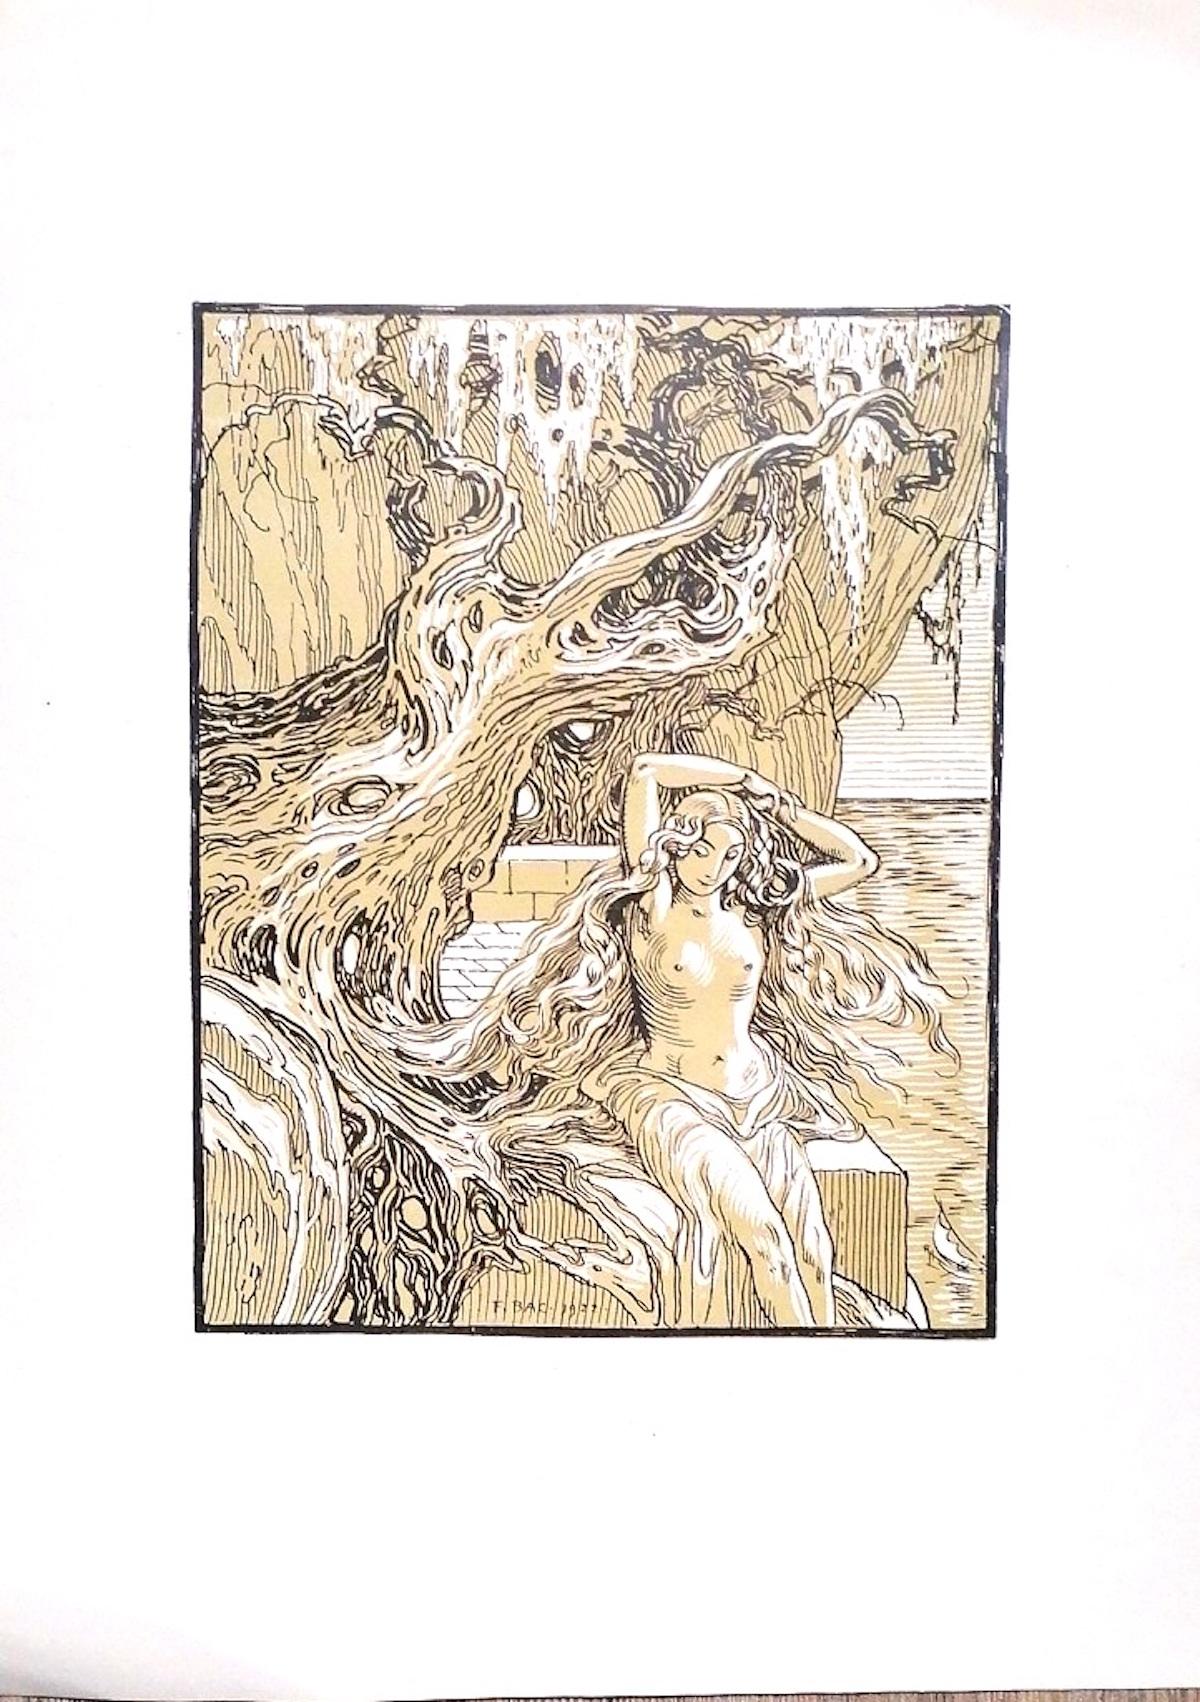 The Siren is an original modern artwork realized by Ferdinand Bac (1859 - 1952) in 1922.

Signed and dated on plate on the lower central margin: F. Bac 1922.

Original Lithograph on ivory paper.

Perfect conditions. 

The Siren is an elegant Liberty